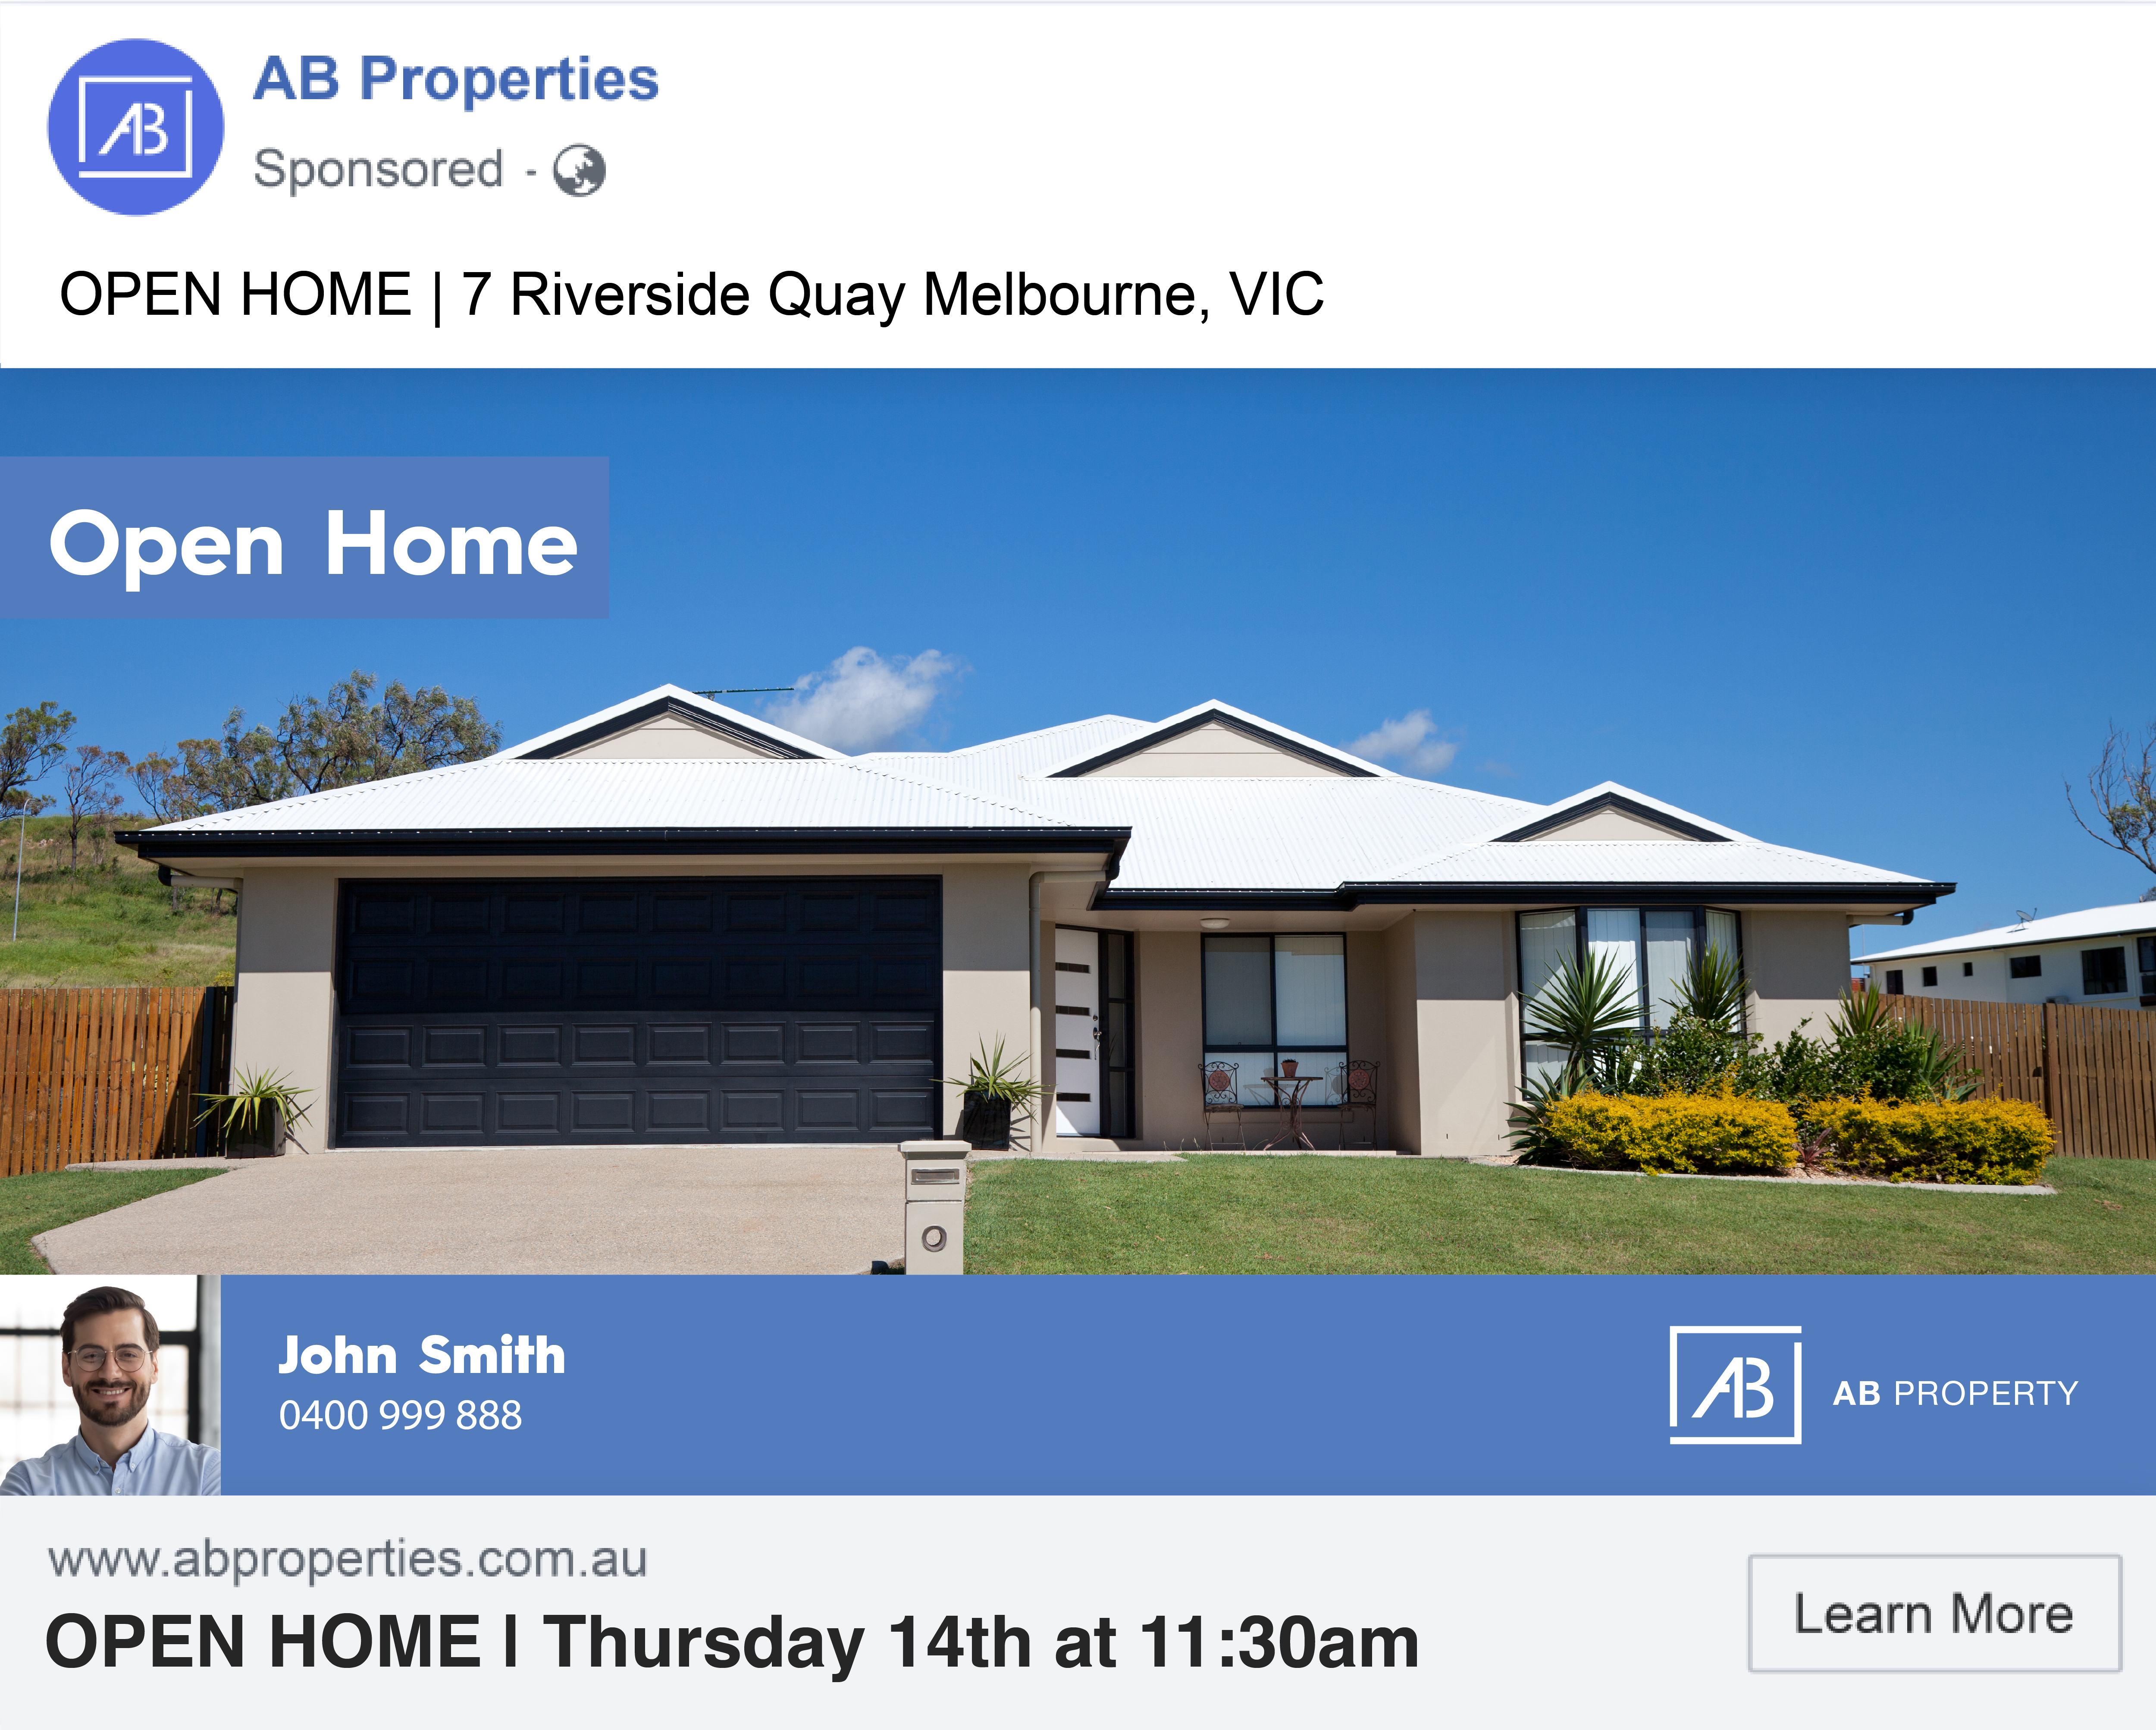 Example of an Open Home digital ad on Facebook